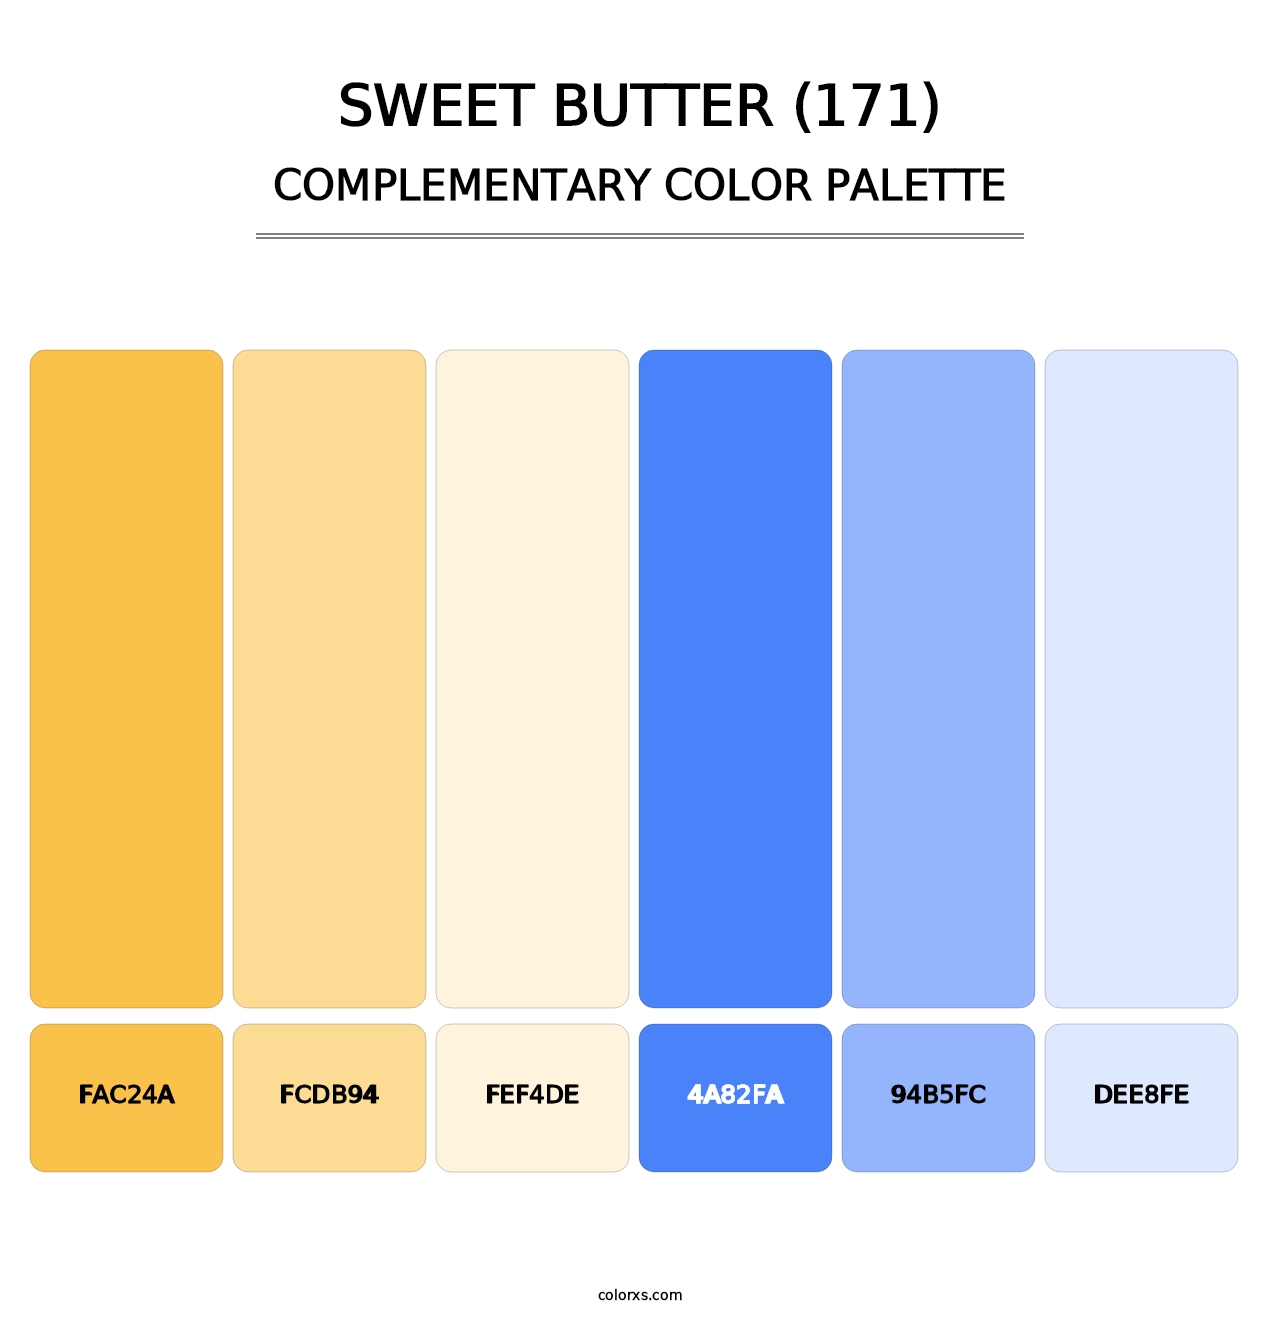 Sweet Butter (171) - Complementary Color Palette